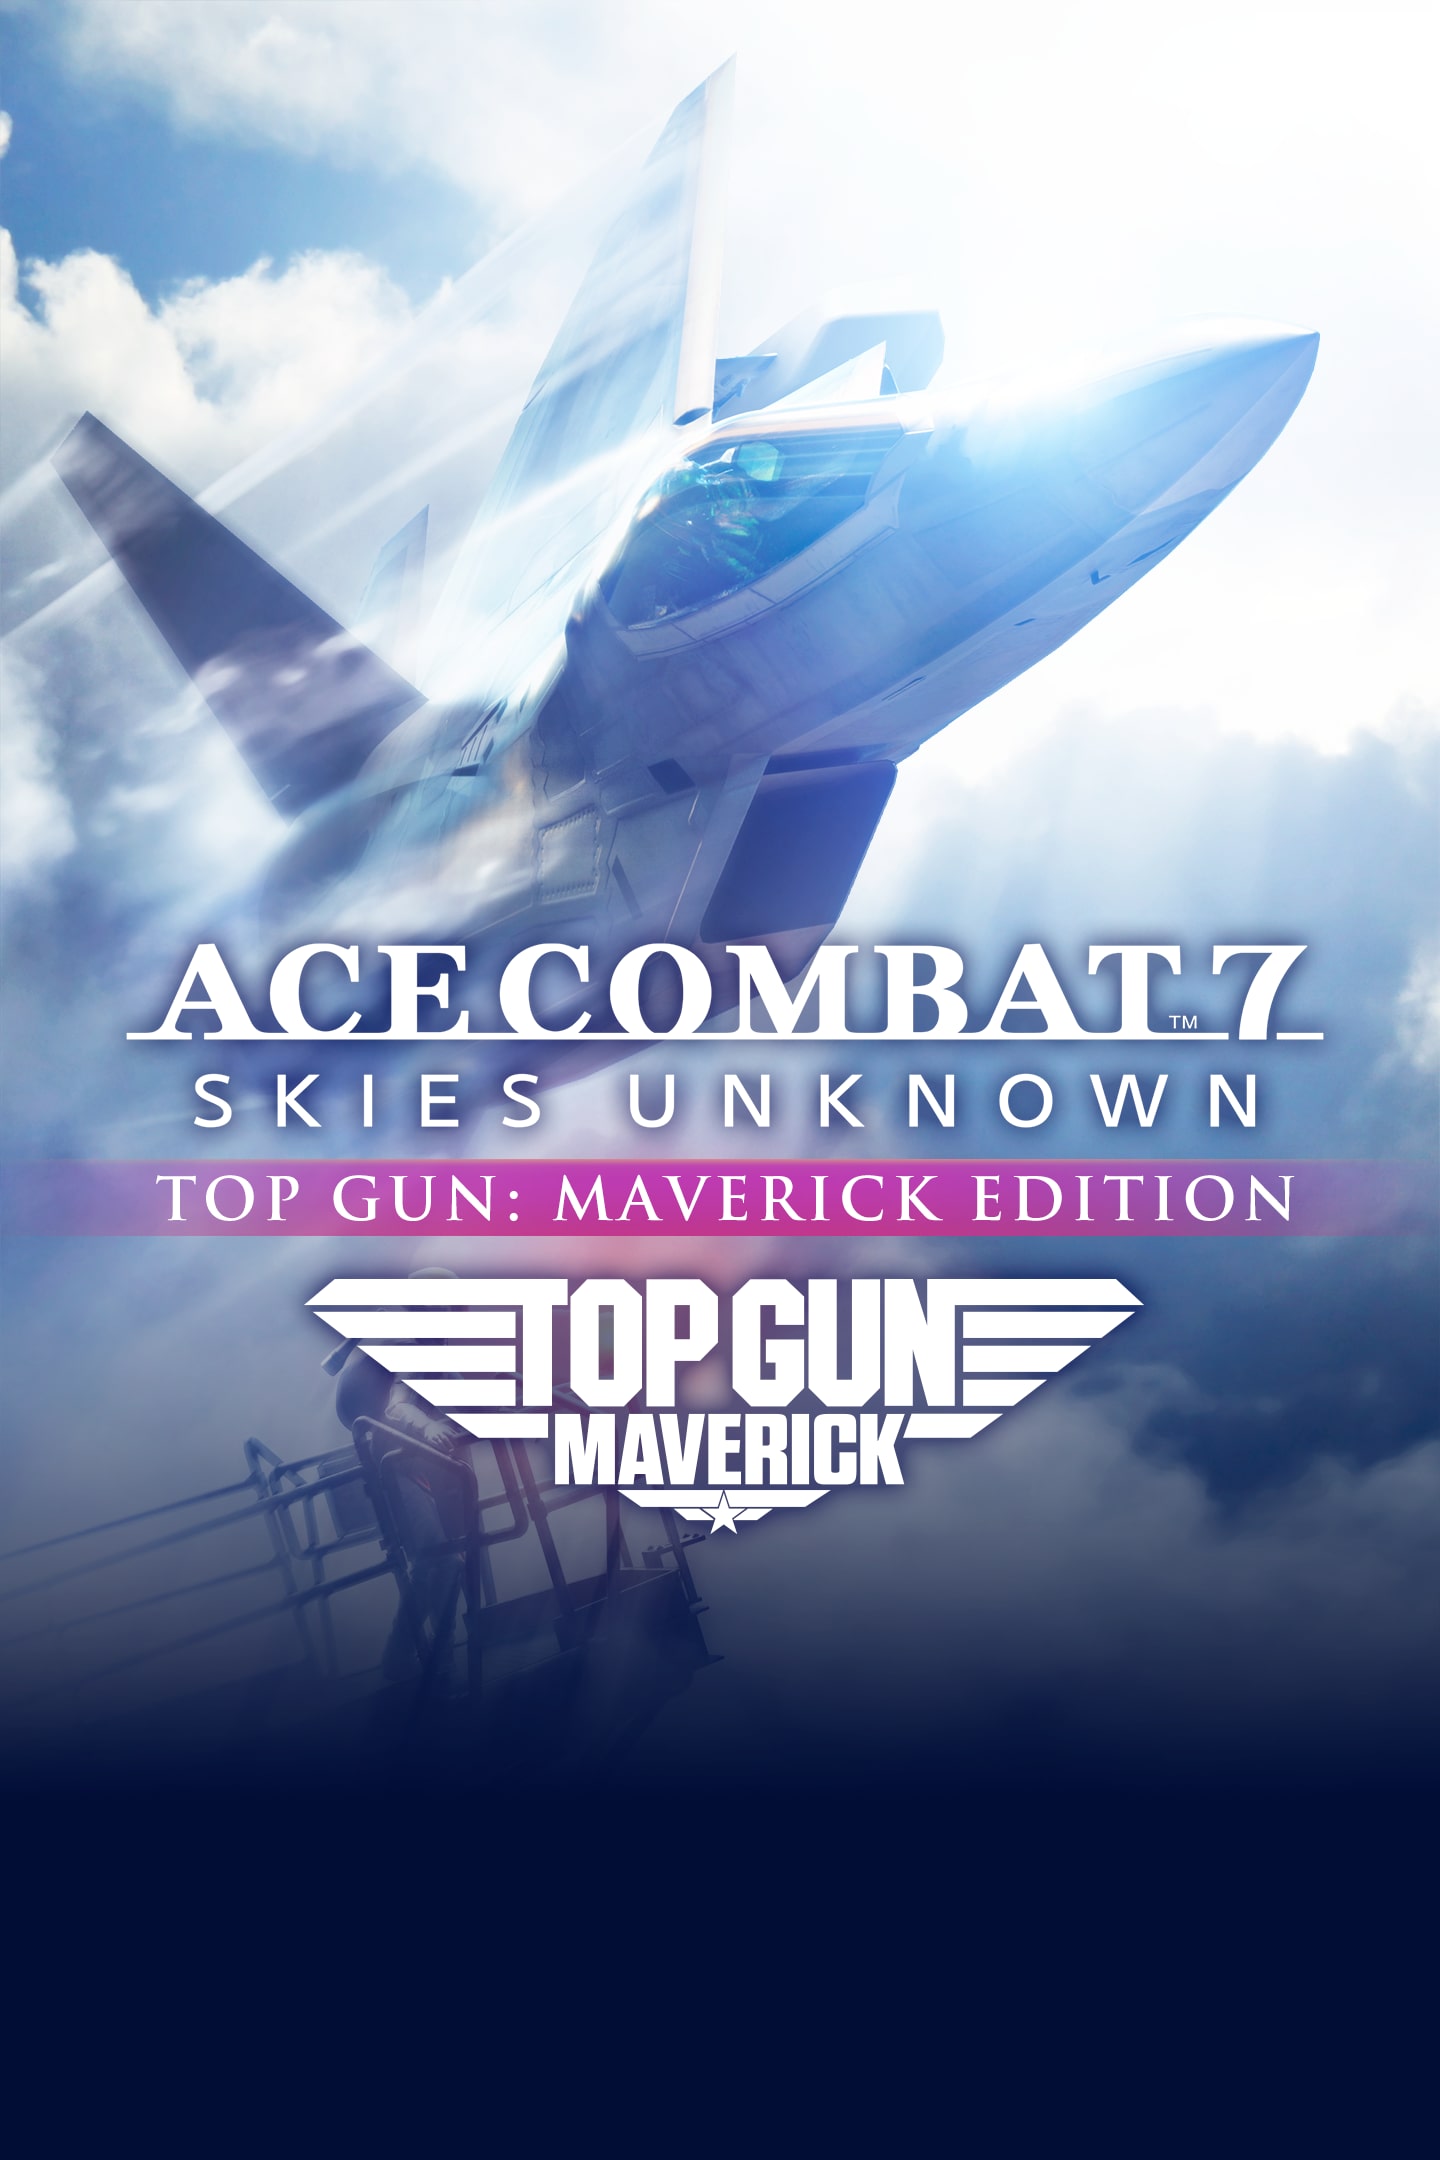 You can fly the Darkstar and other planes from Top Gun: Maverick in Ace  Combat 7